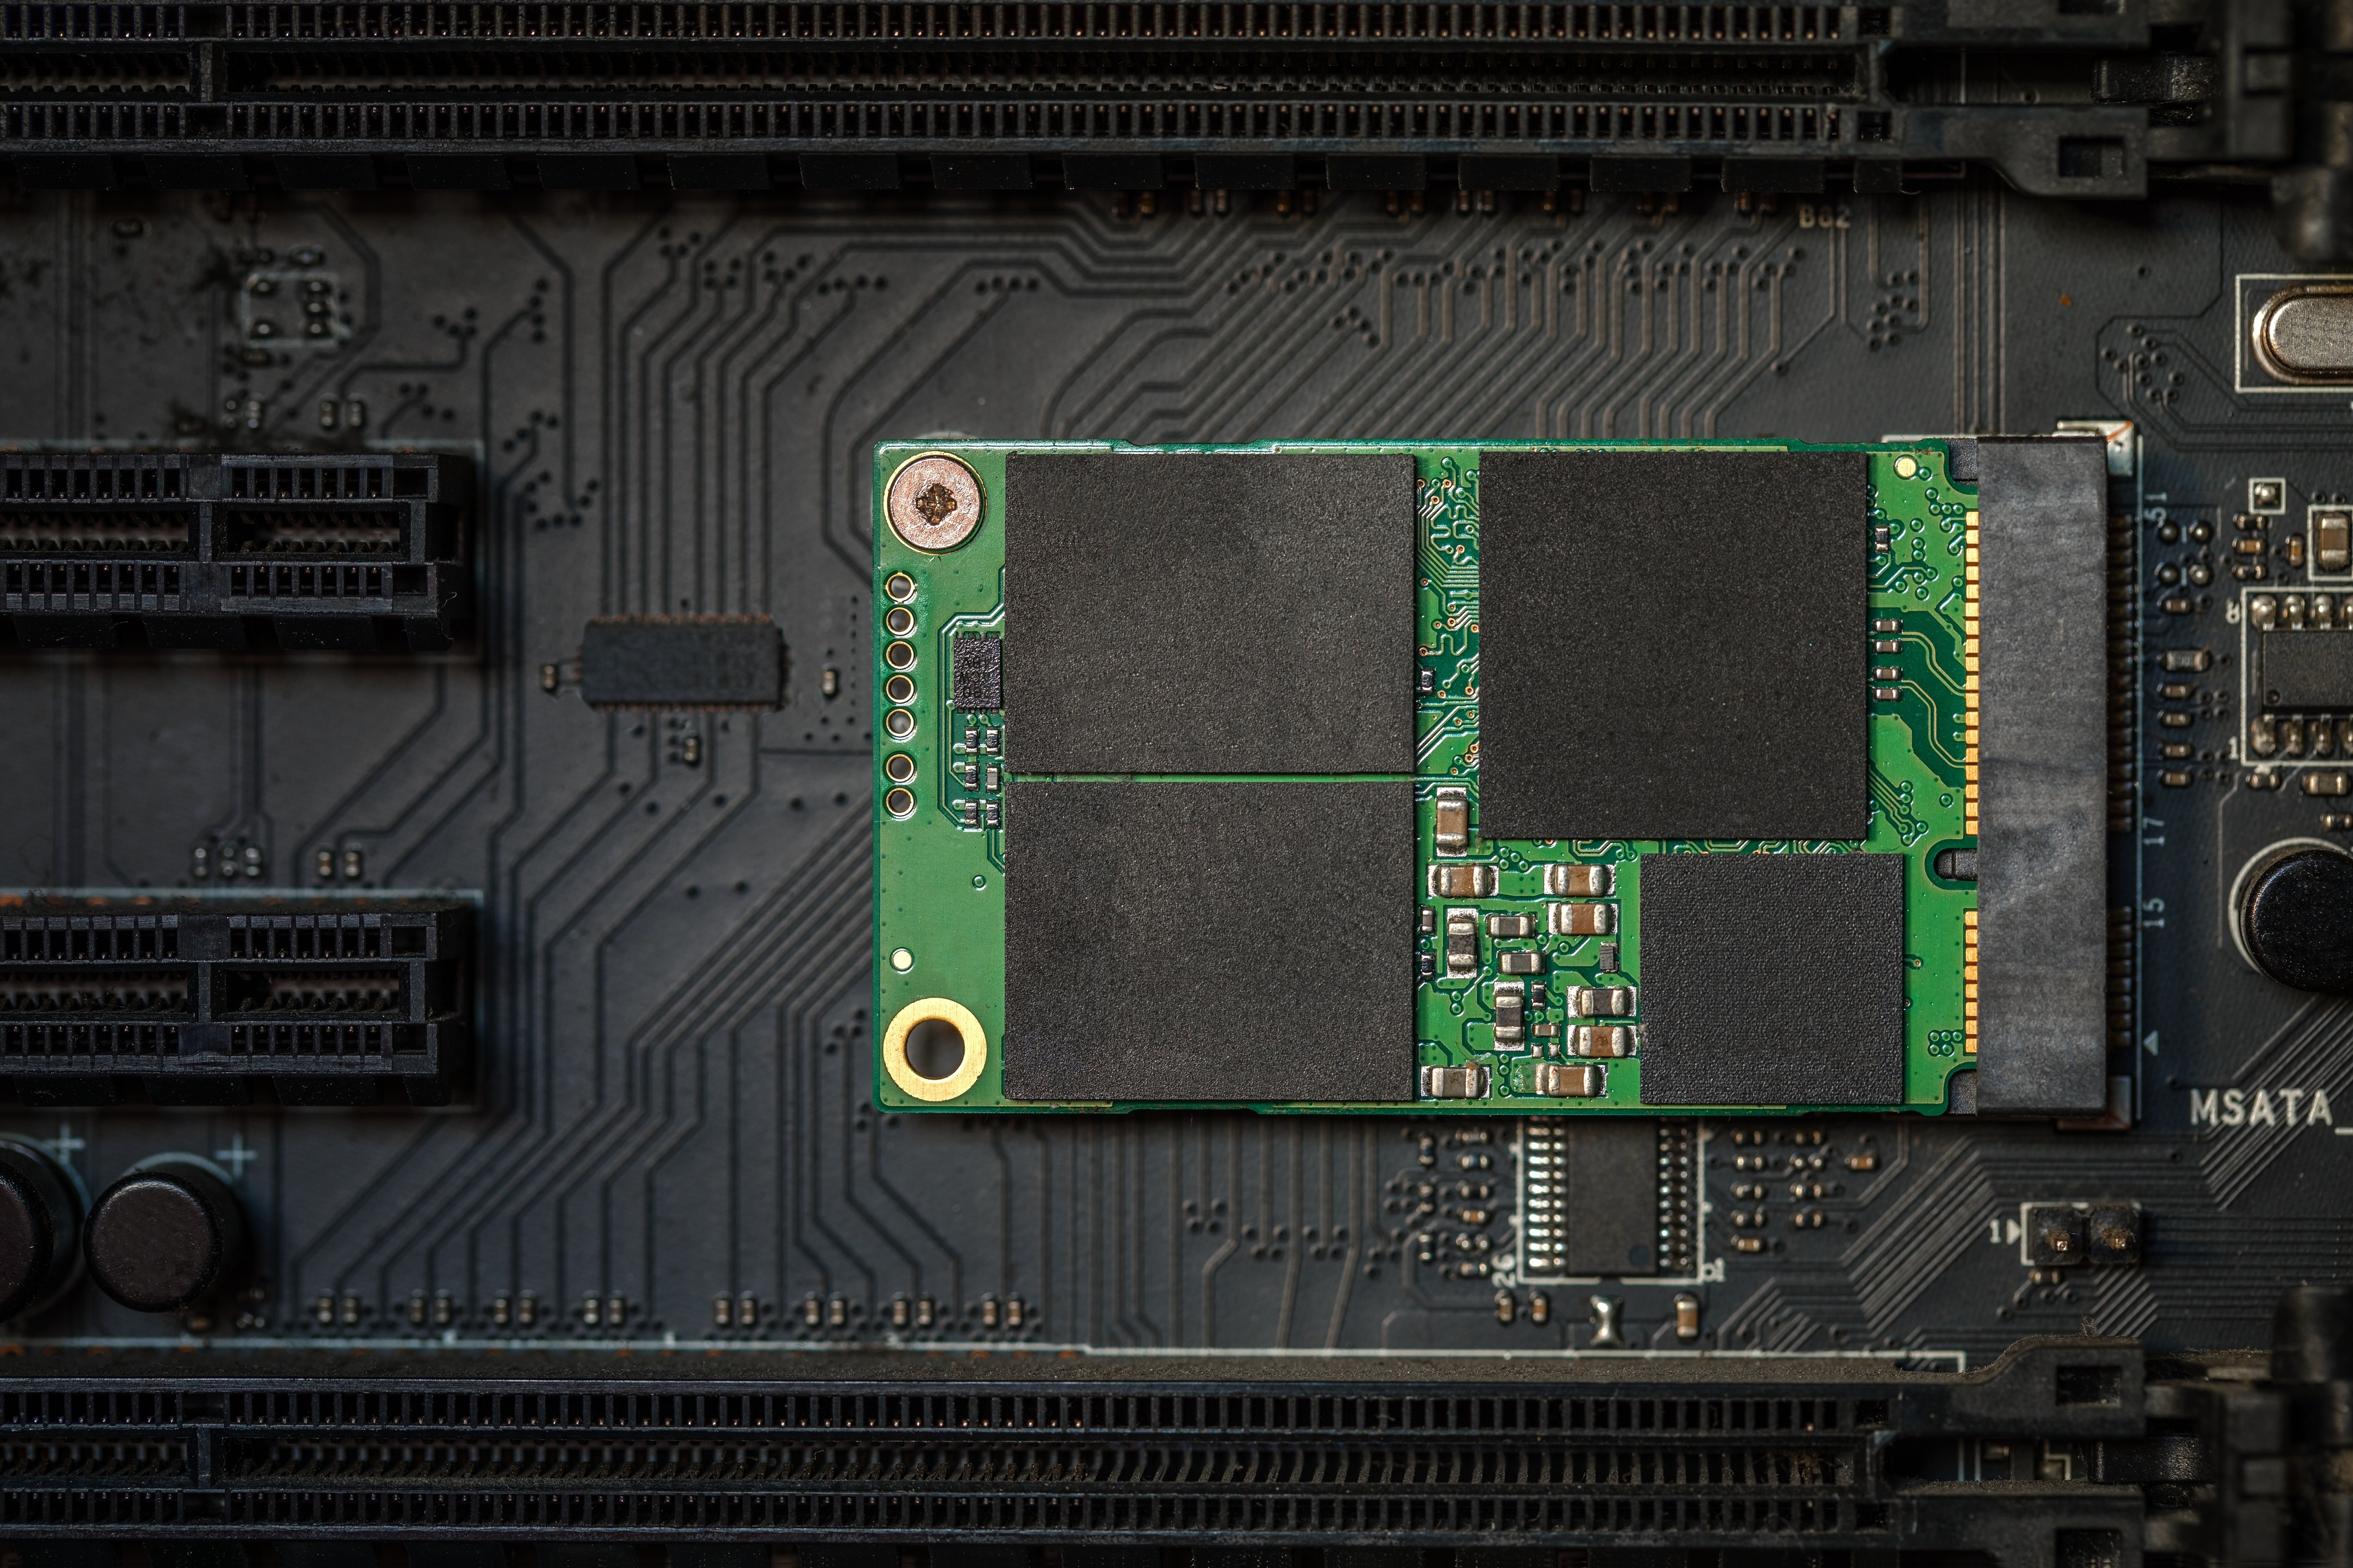 Pluggable SSD on a high-speed PCB material